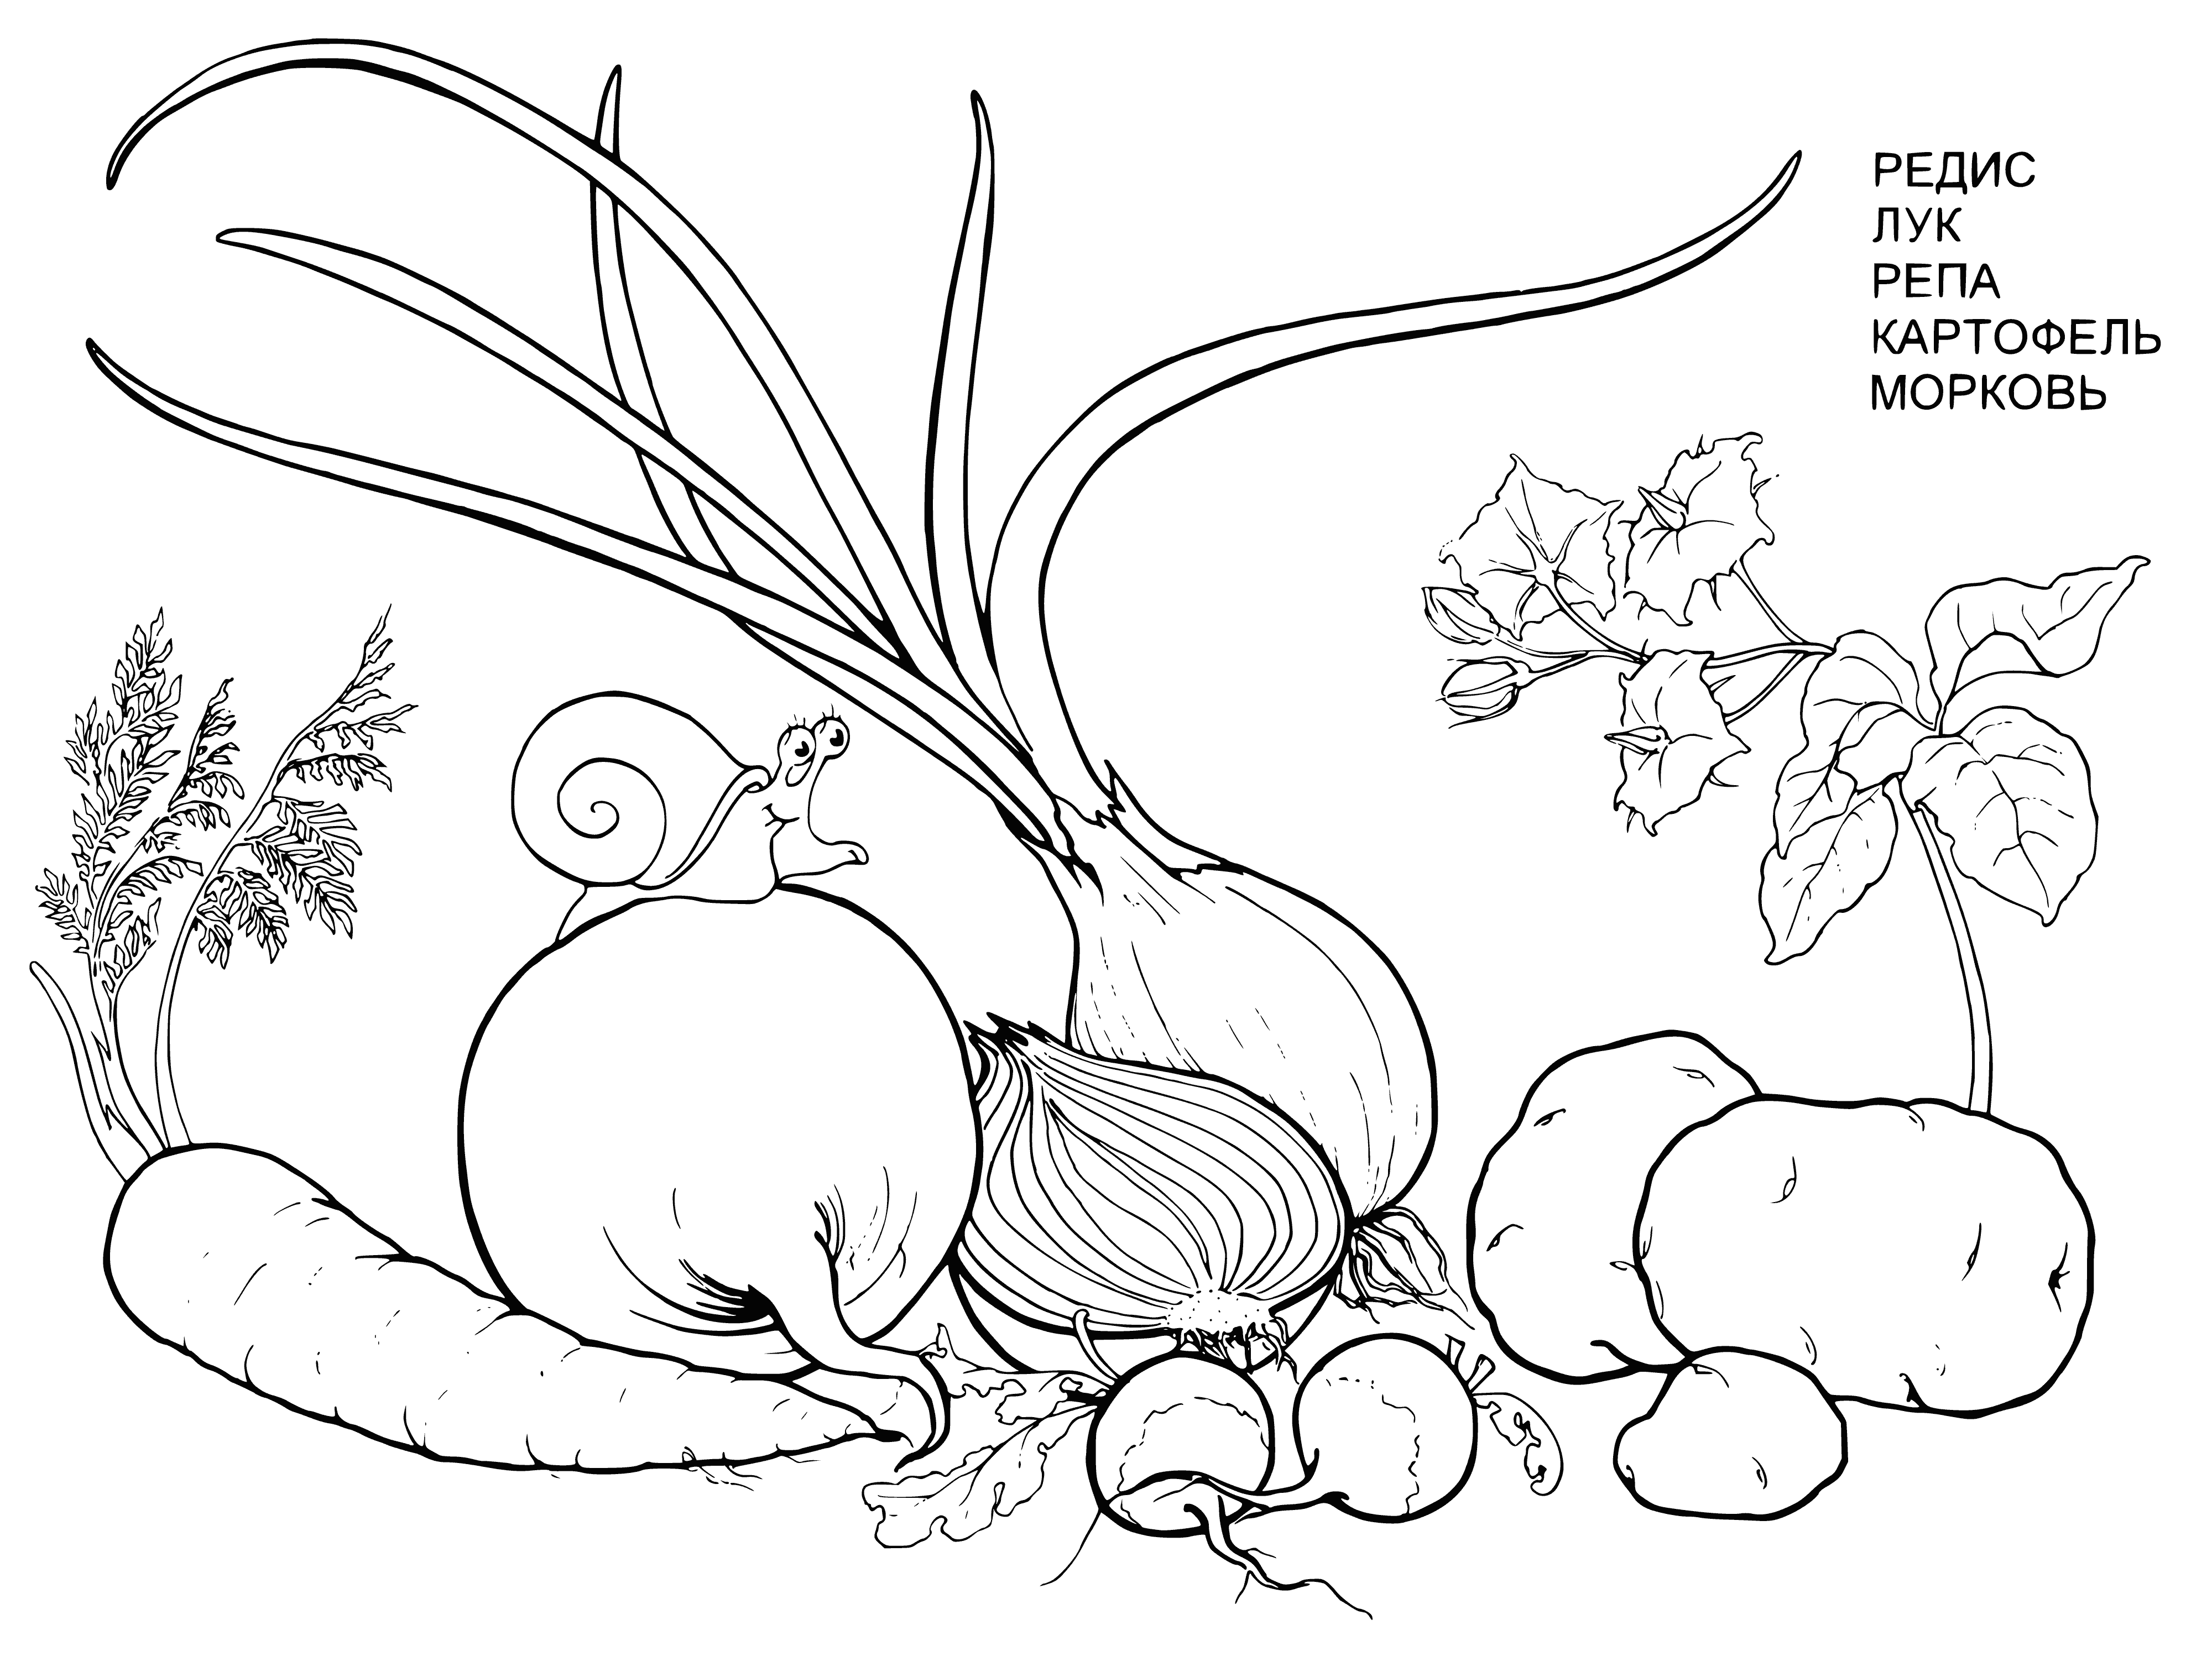 coloring page: Coloring page of an outdoor garden with tall, short, & small plants w/ different veg growing: long leaves, green & red, yellow & white.